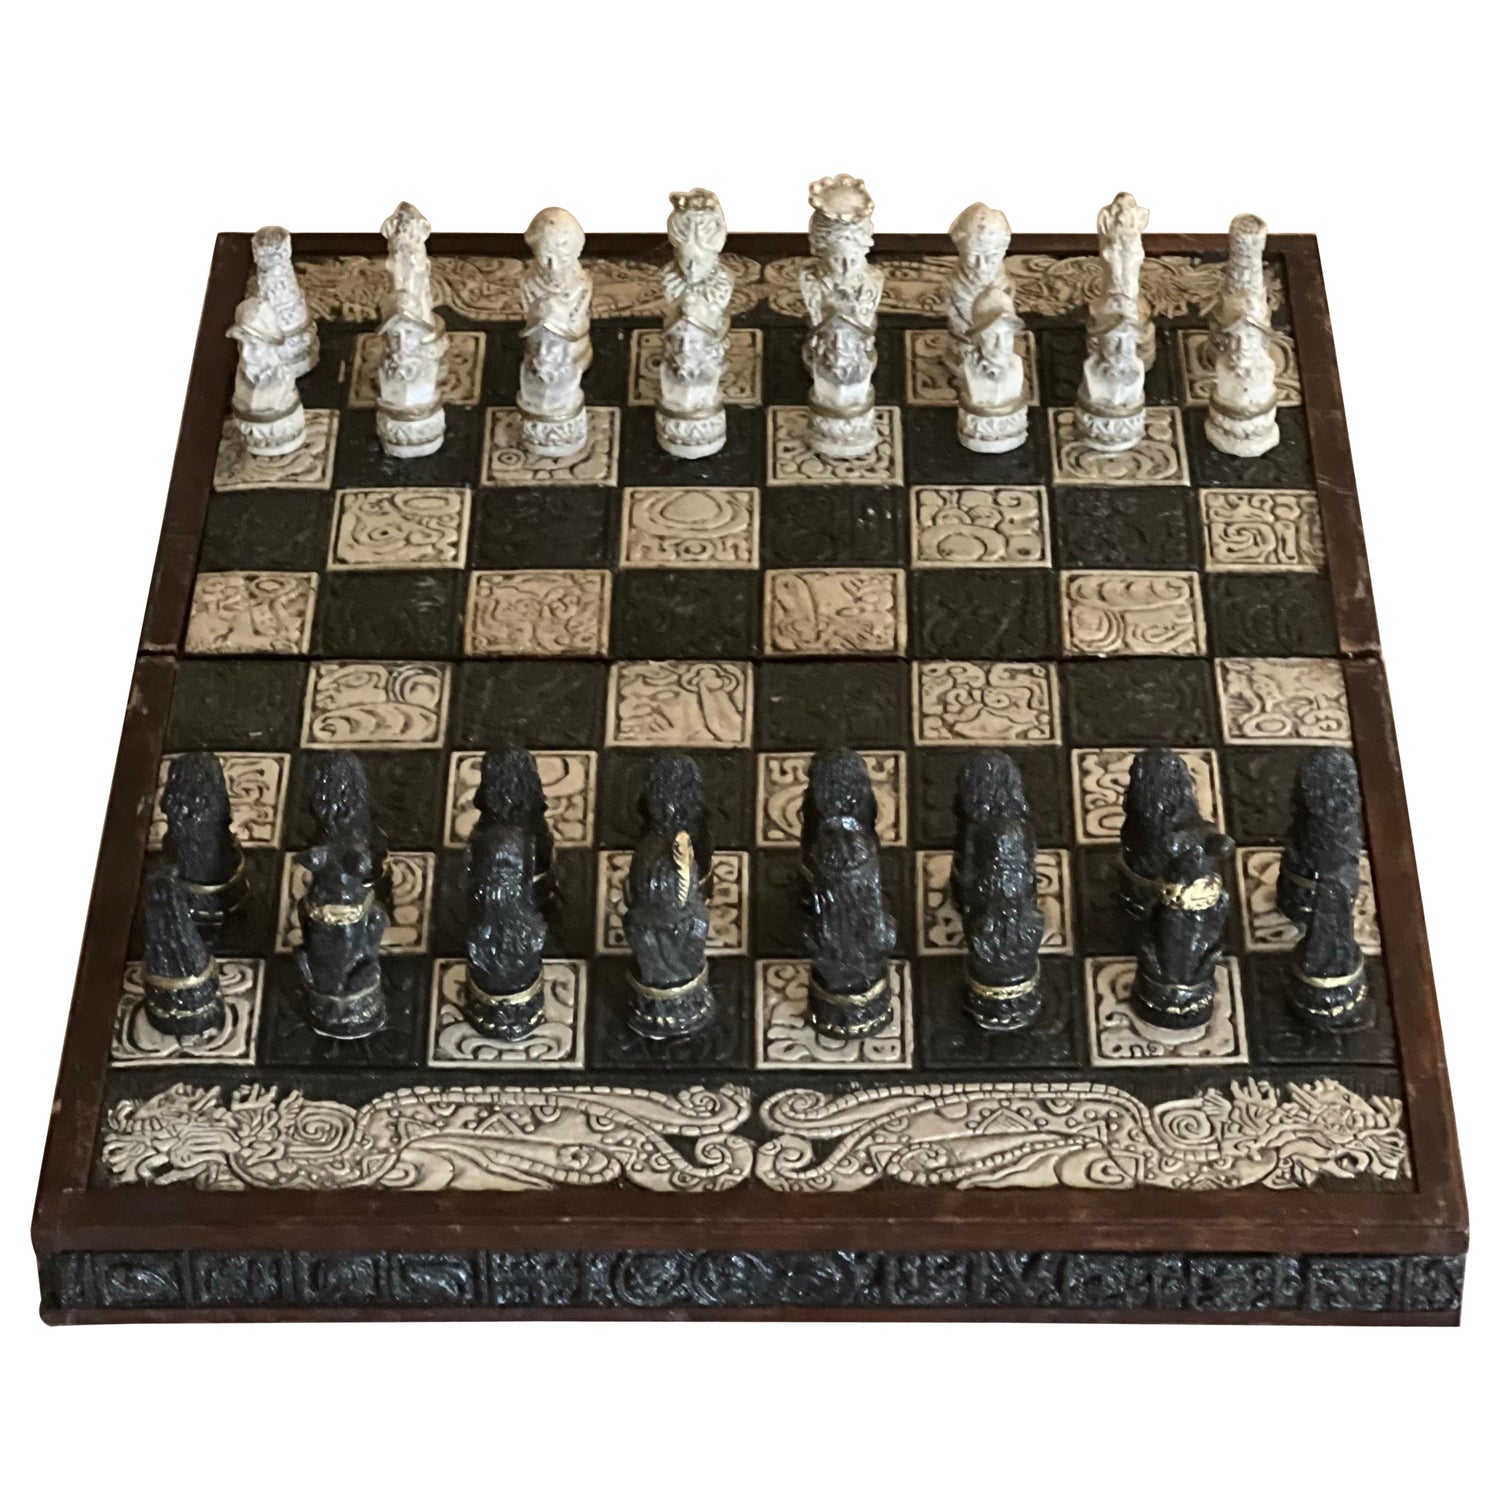 Special Edition Giant Deluxe Resin Chess Piece - Henry Chess Sets